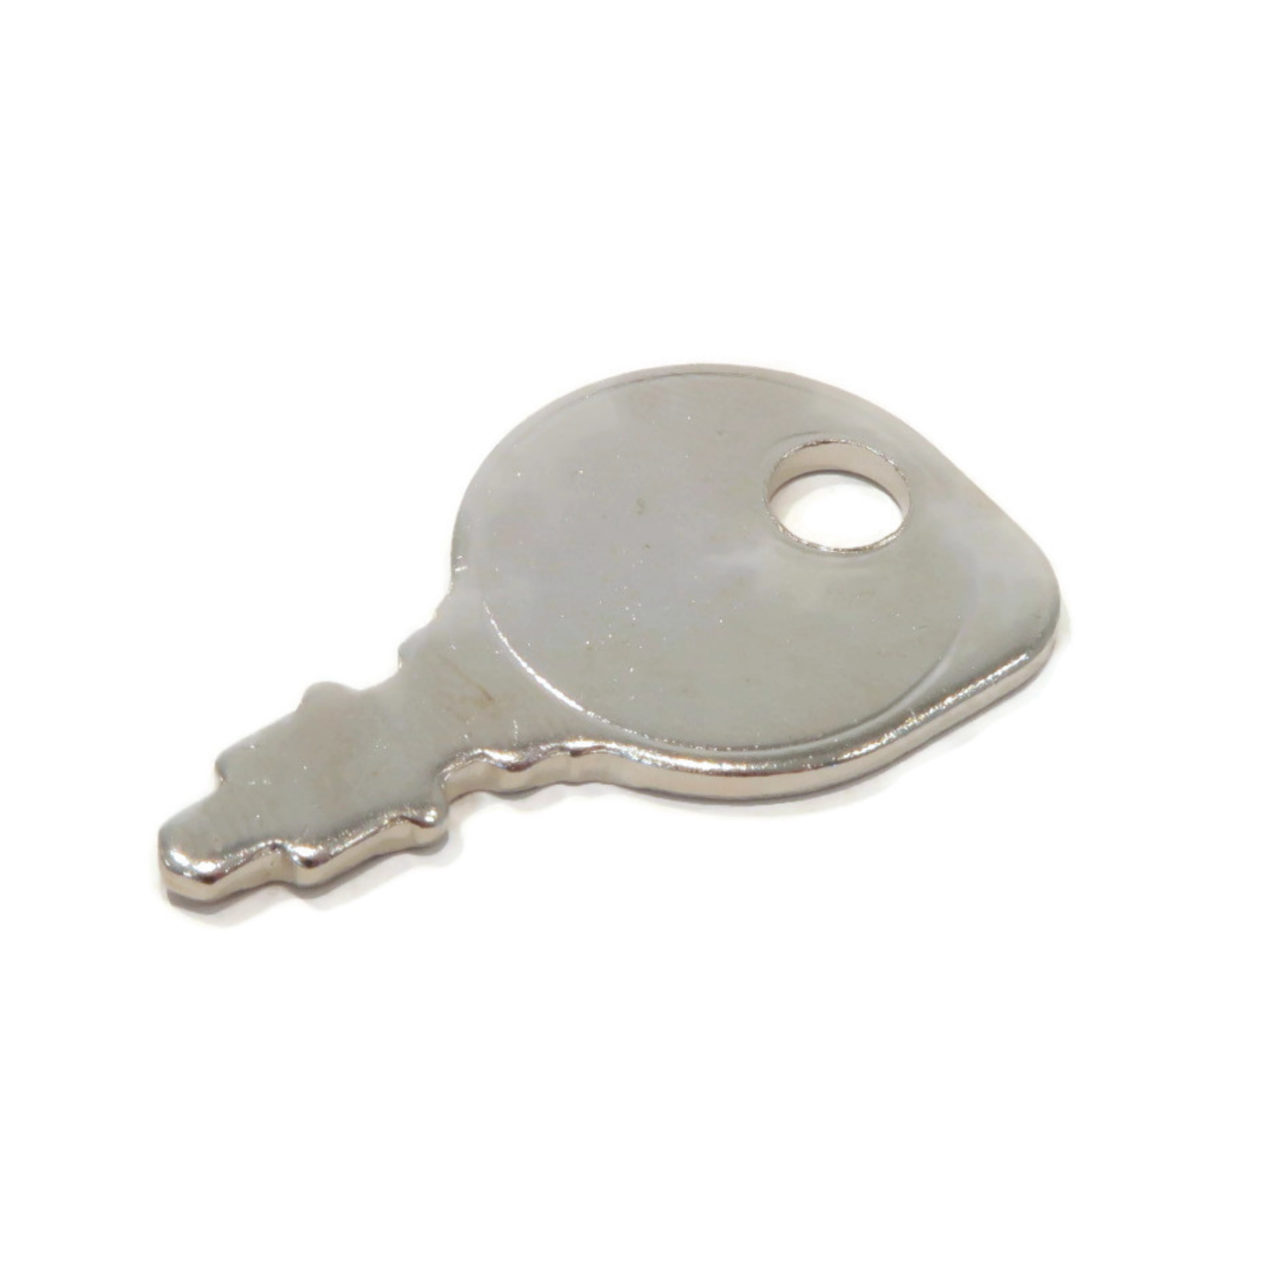 The ROP Shop | Starter Key For Briggs & Stratton 422707-1510-01, 422707-1511-01, 422707-1512-01 - image 1 of 5